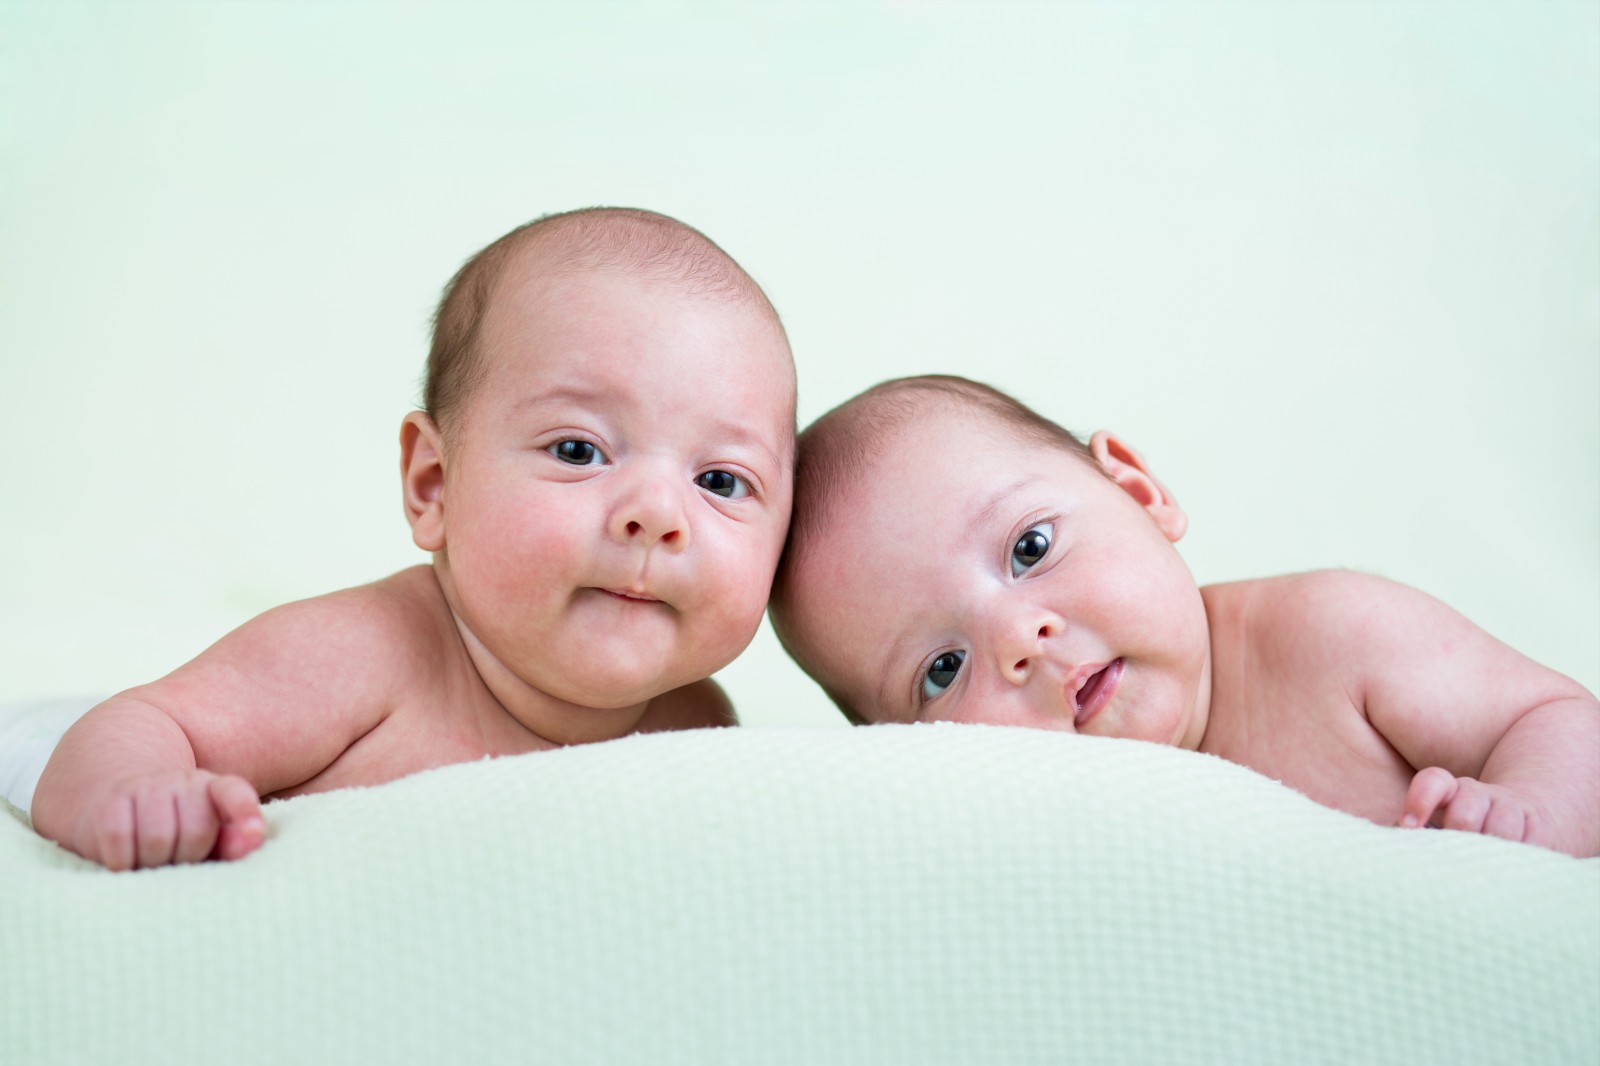 15. Twins can invent their own language